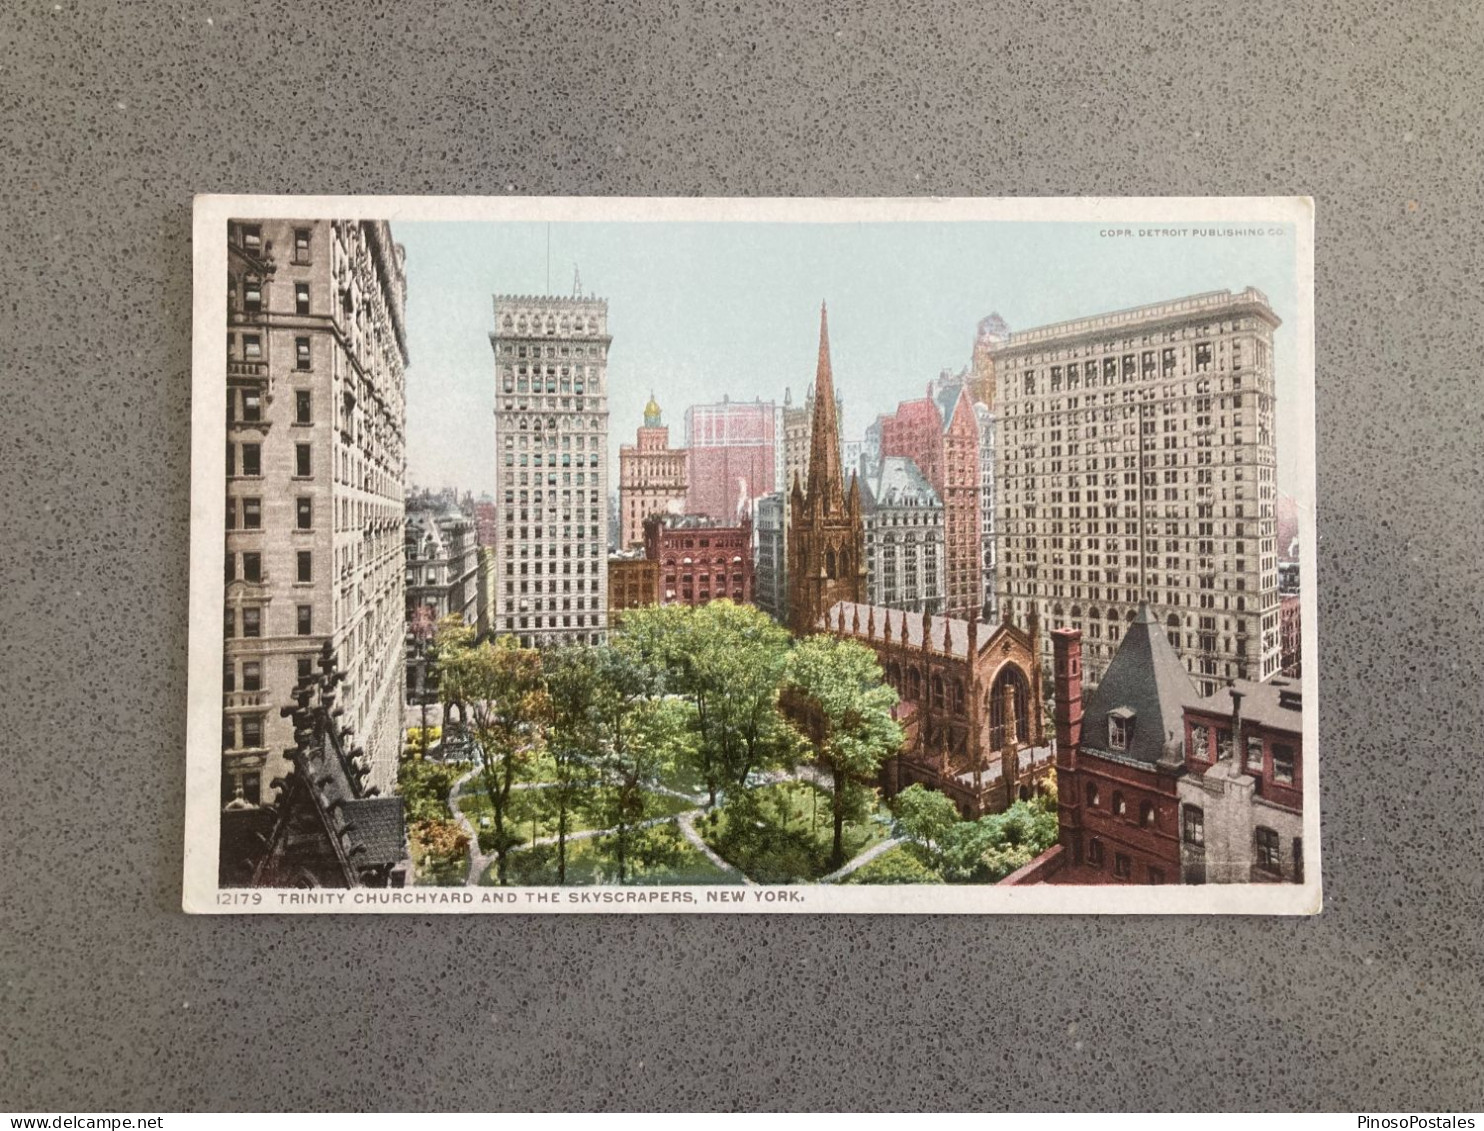 Trinity Churchyard And The Skyscrapers, New York Carte Postale Postcard - Andere Monumente & Gebäude